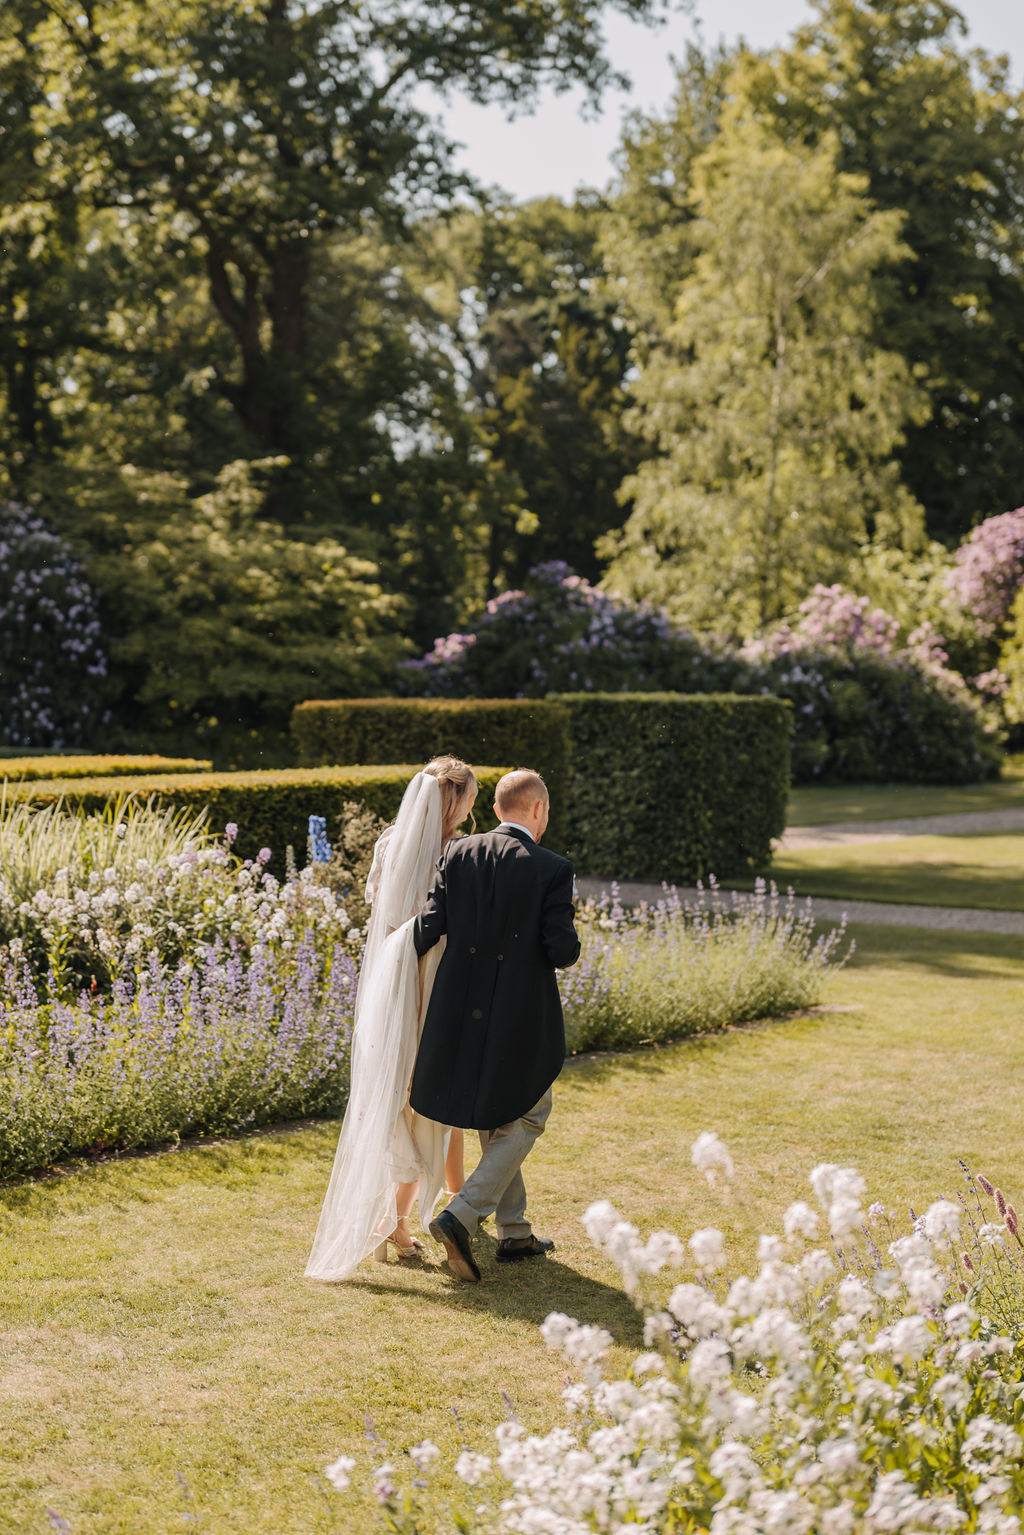 A bride and groom walk along a green lawn flanked by established garden beds filled with summer flowers